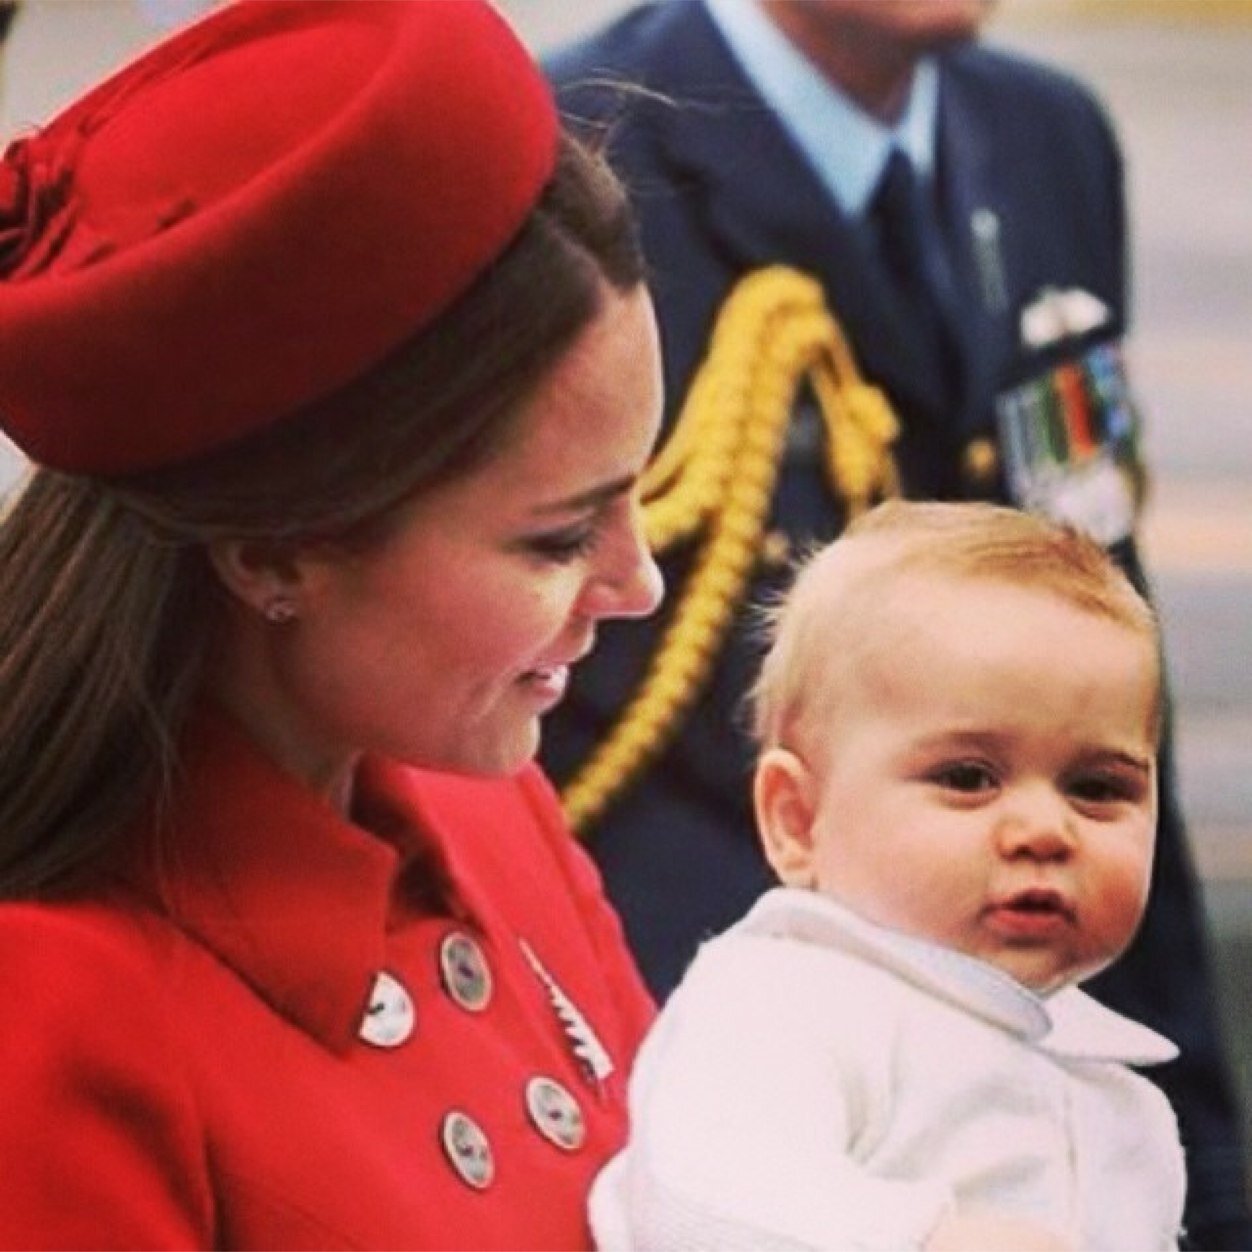 Royal fan, Kate middleton is my fashion icon and Baby George is adorable